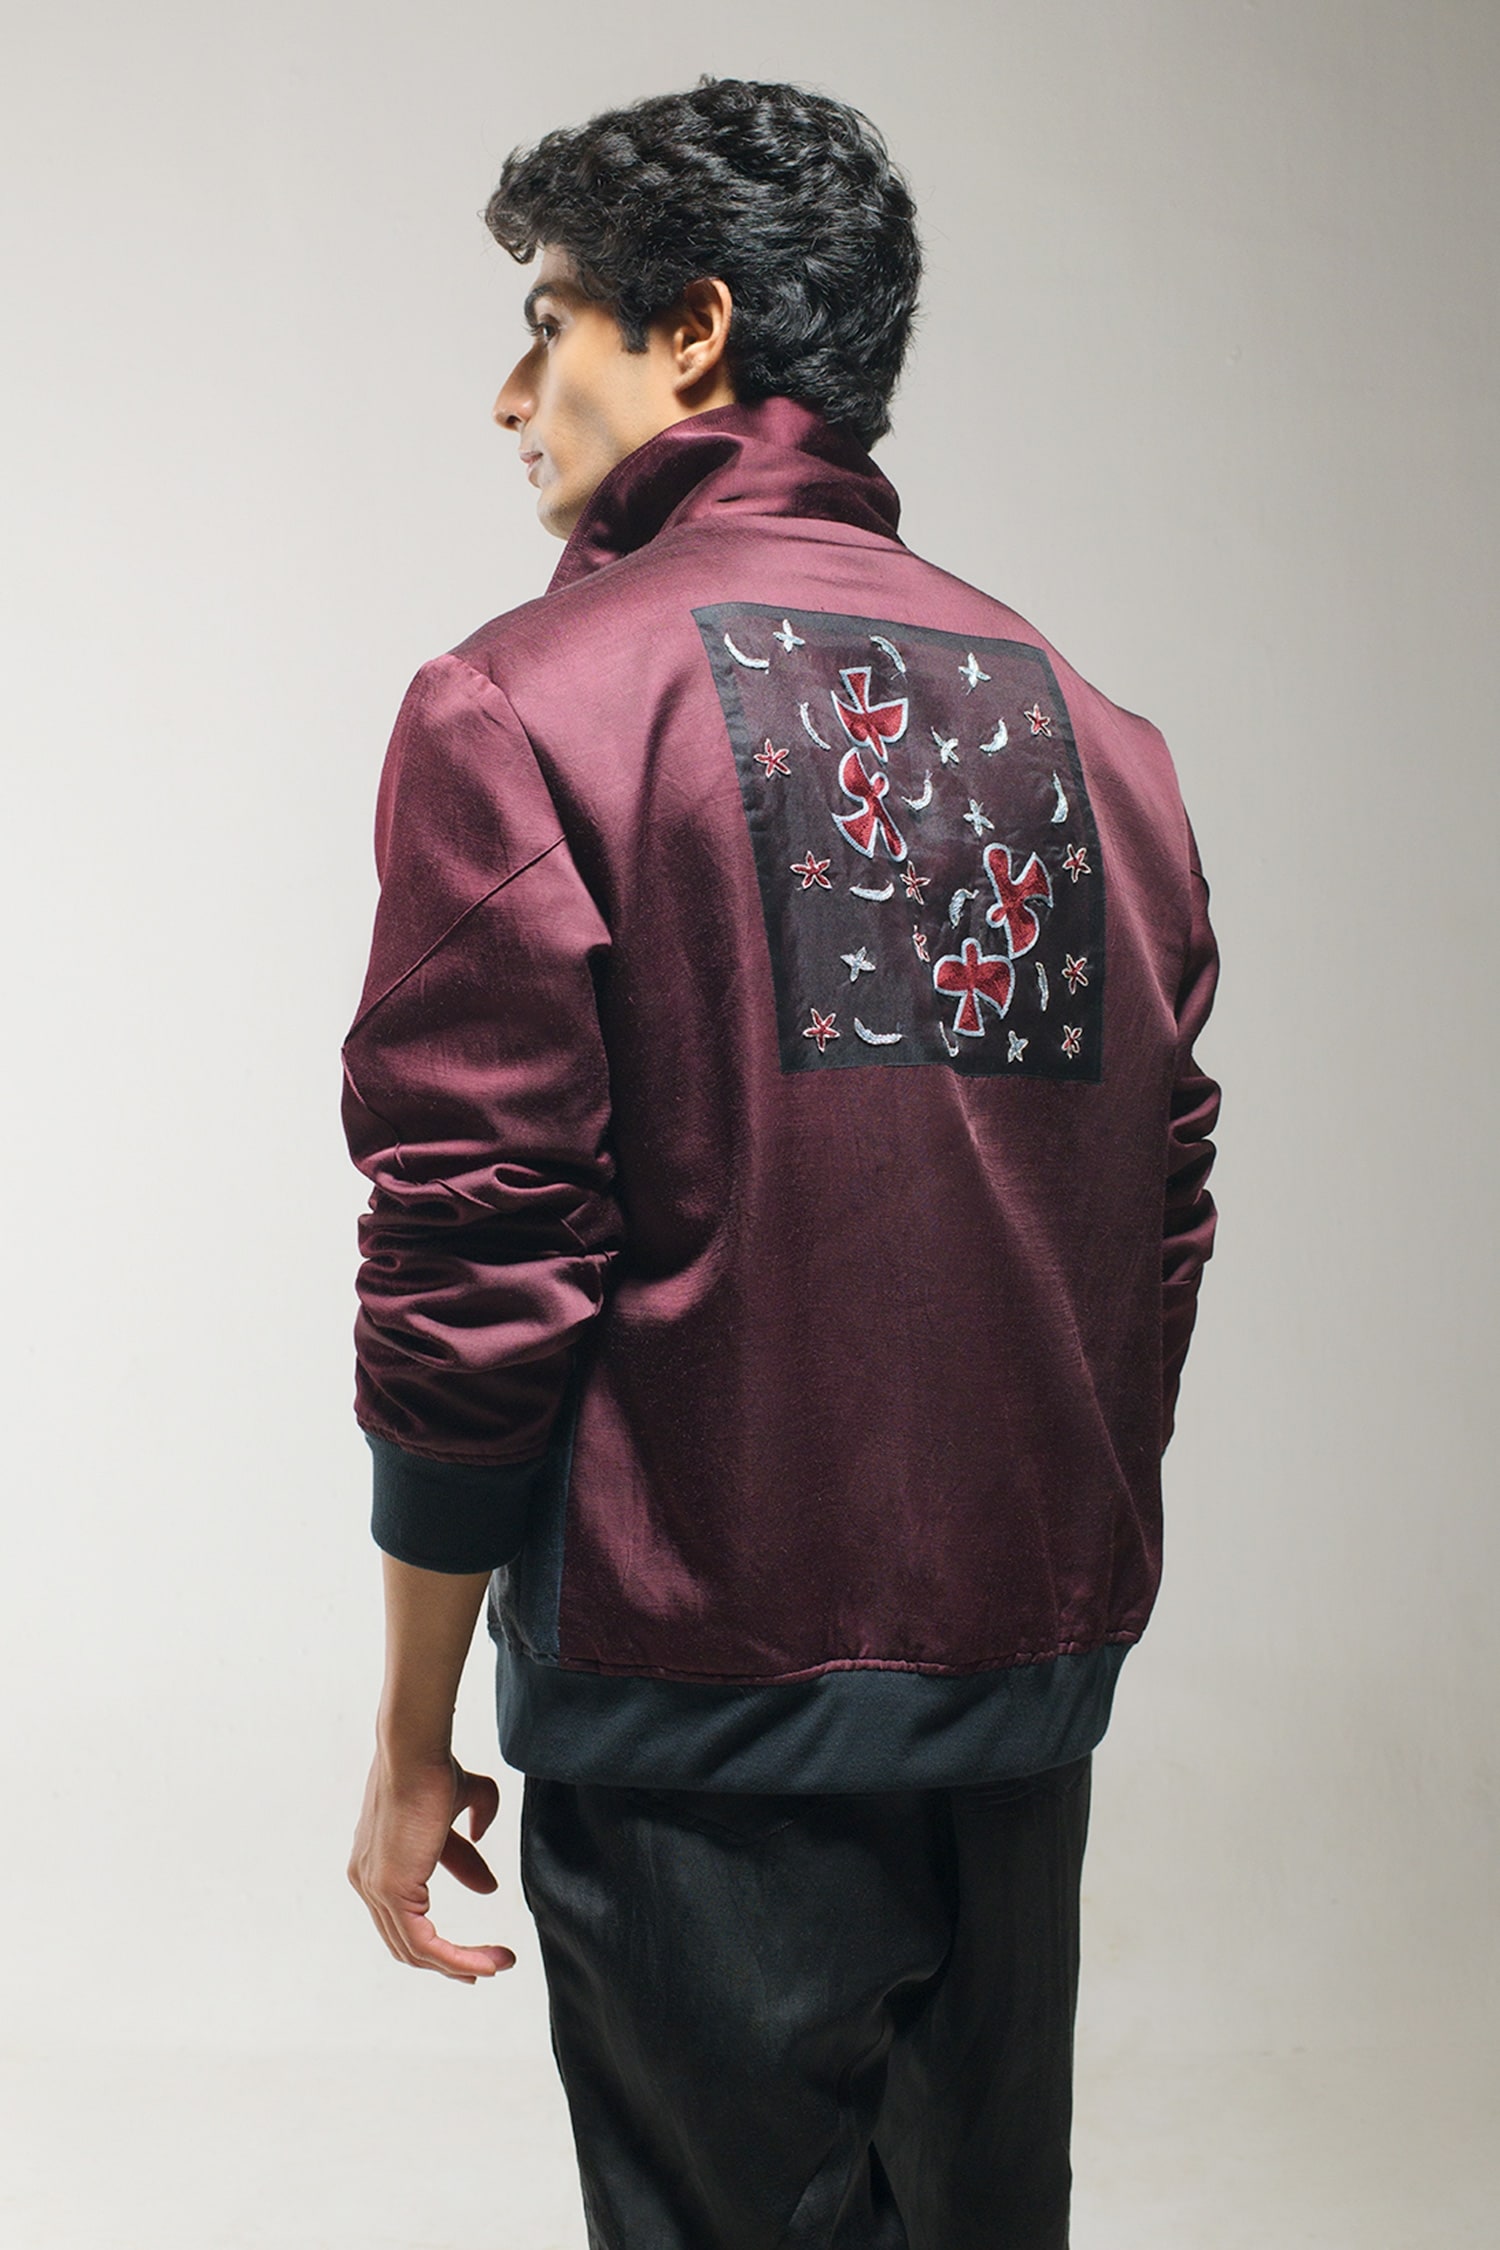 Embroidered bomber jacket No brand - M, buy pre-owned at 29 EUR